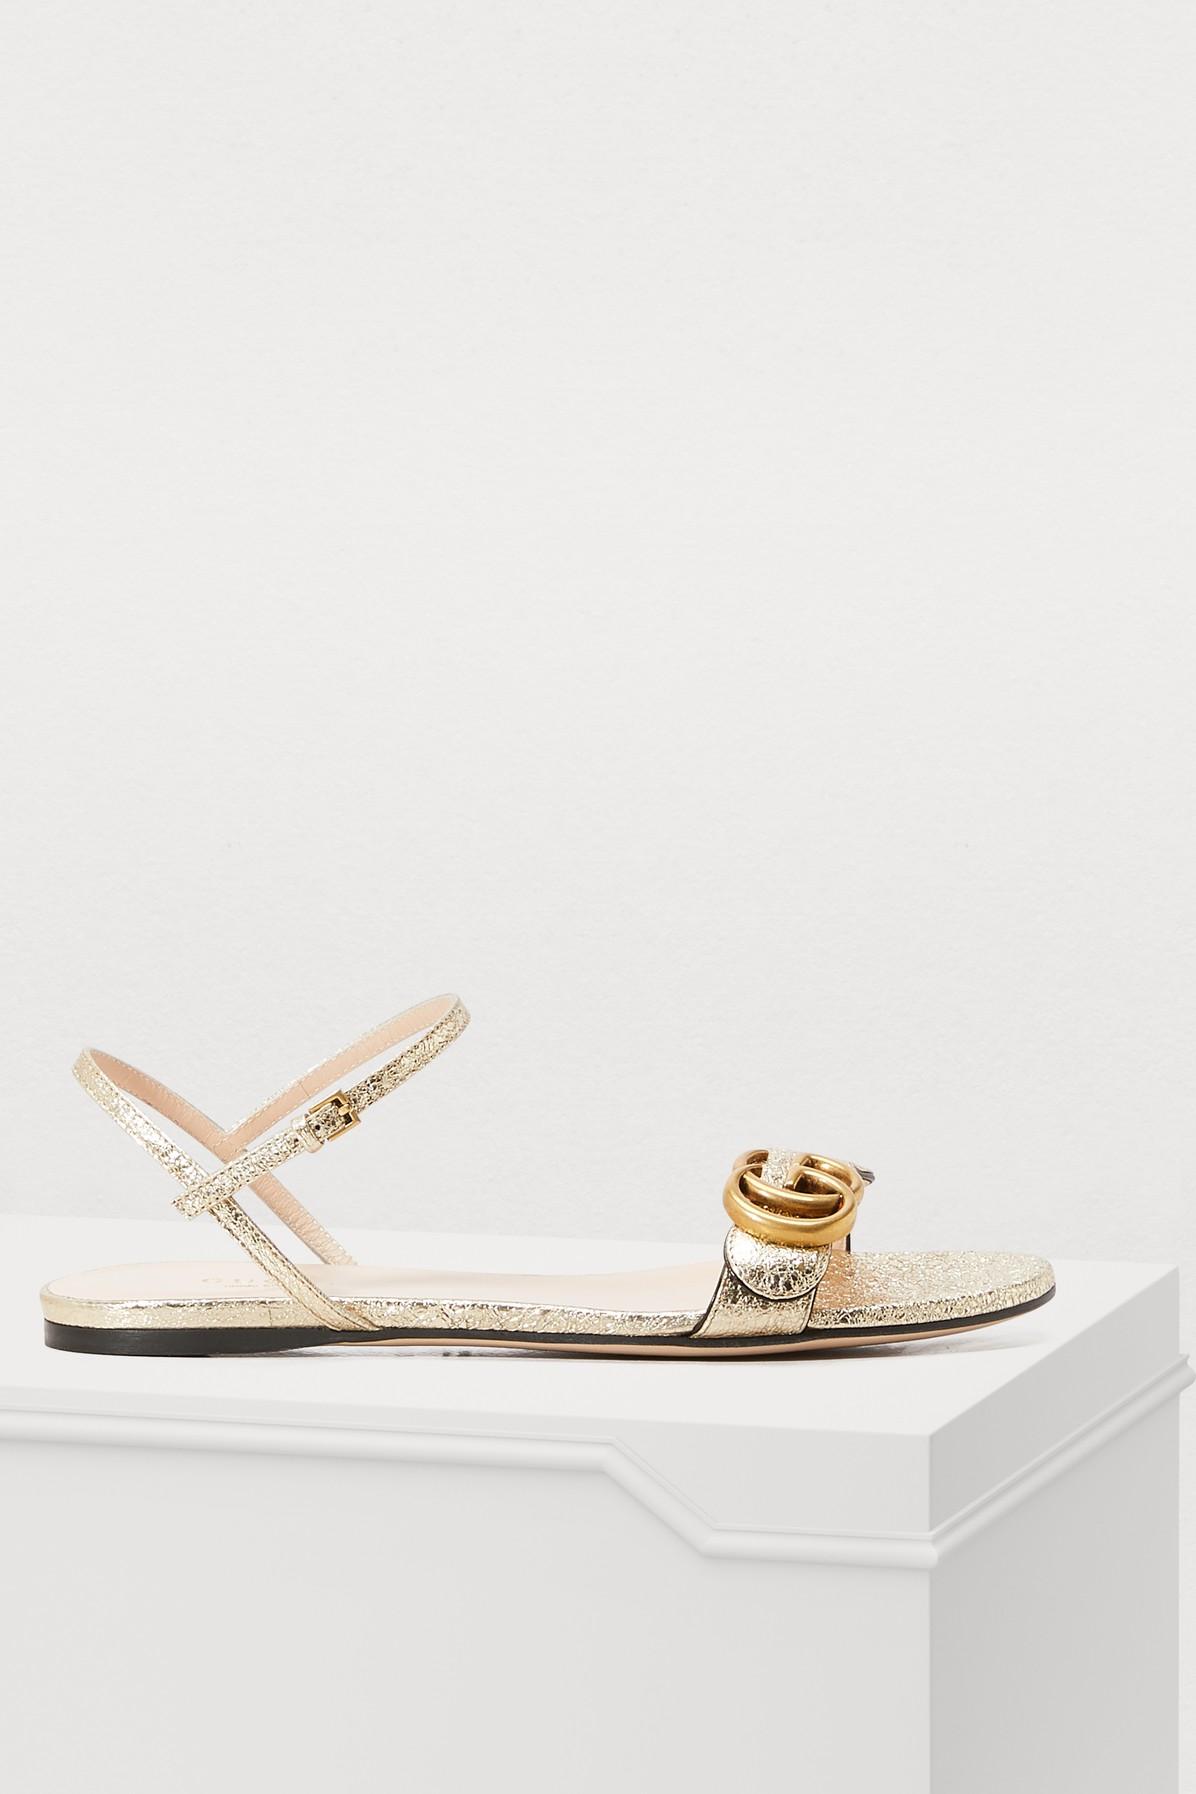 Gucci GG Marmont Sandals in Metallic | Lyst